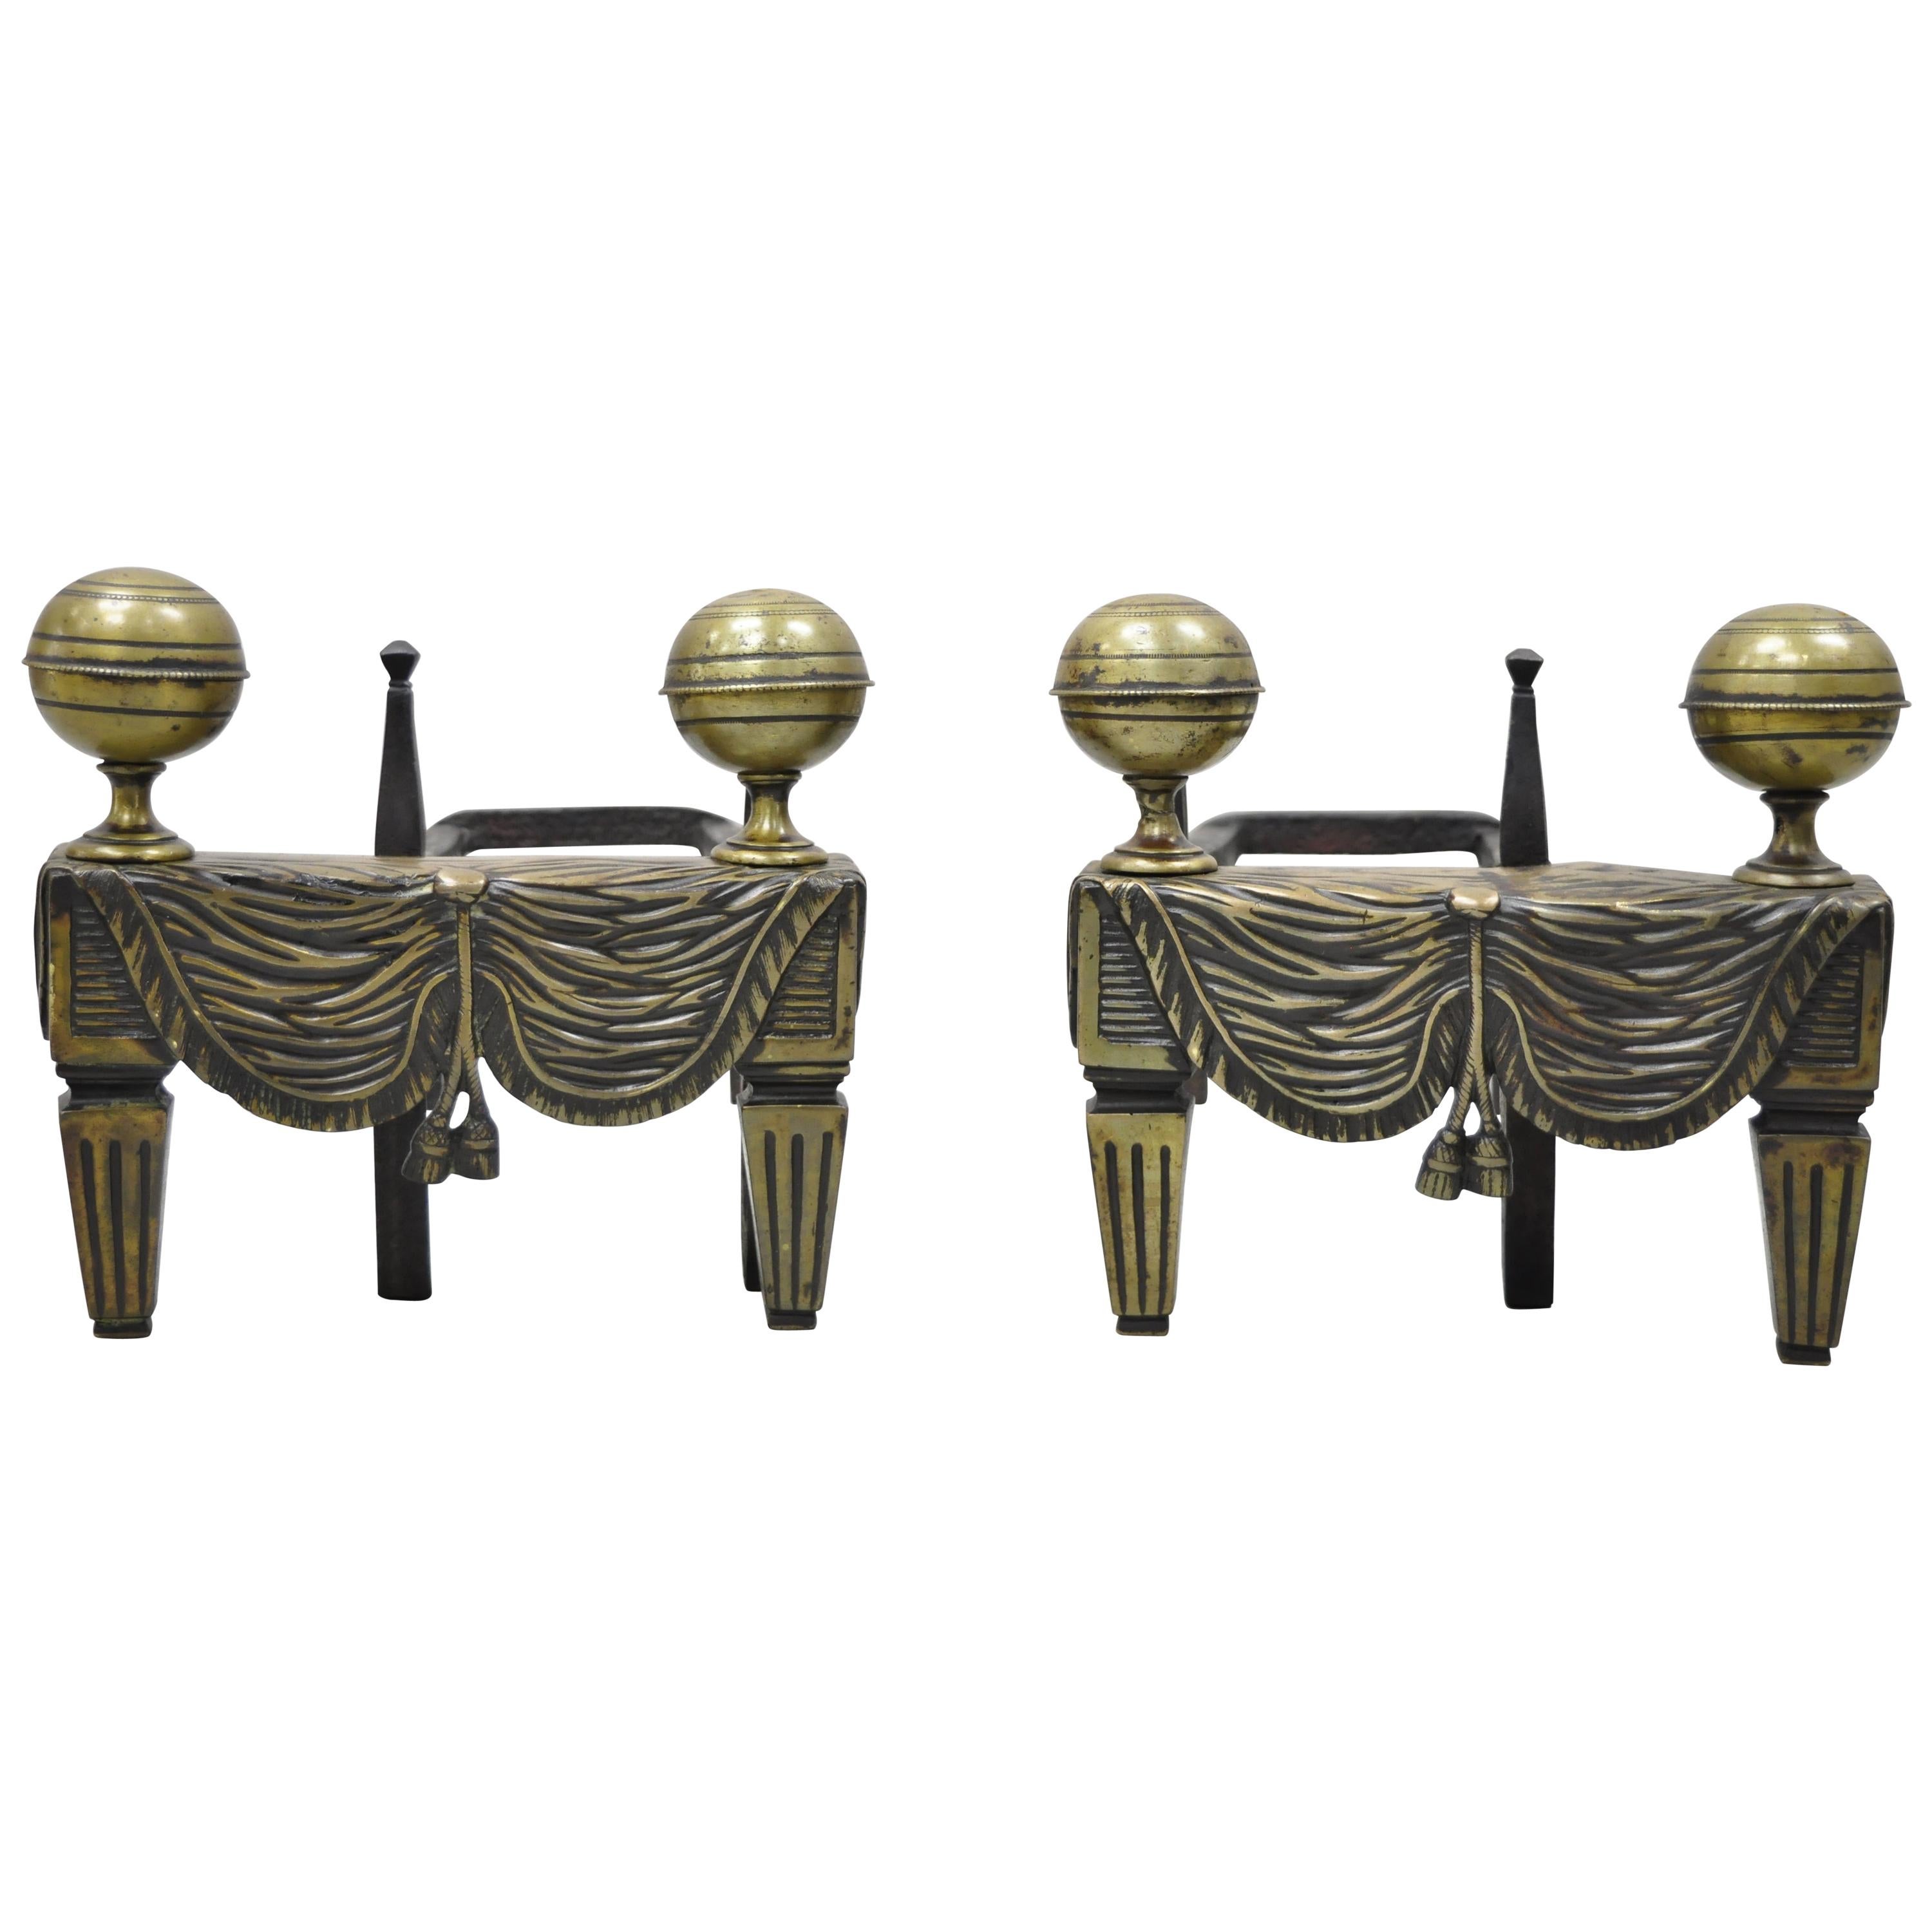 French Empire Bronze Drape & Tassel Cannonball Chenet Small Andirons, a Pair For Sale